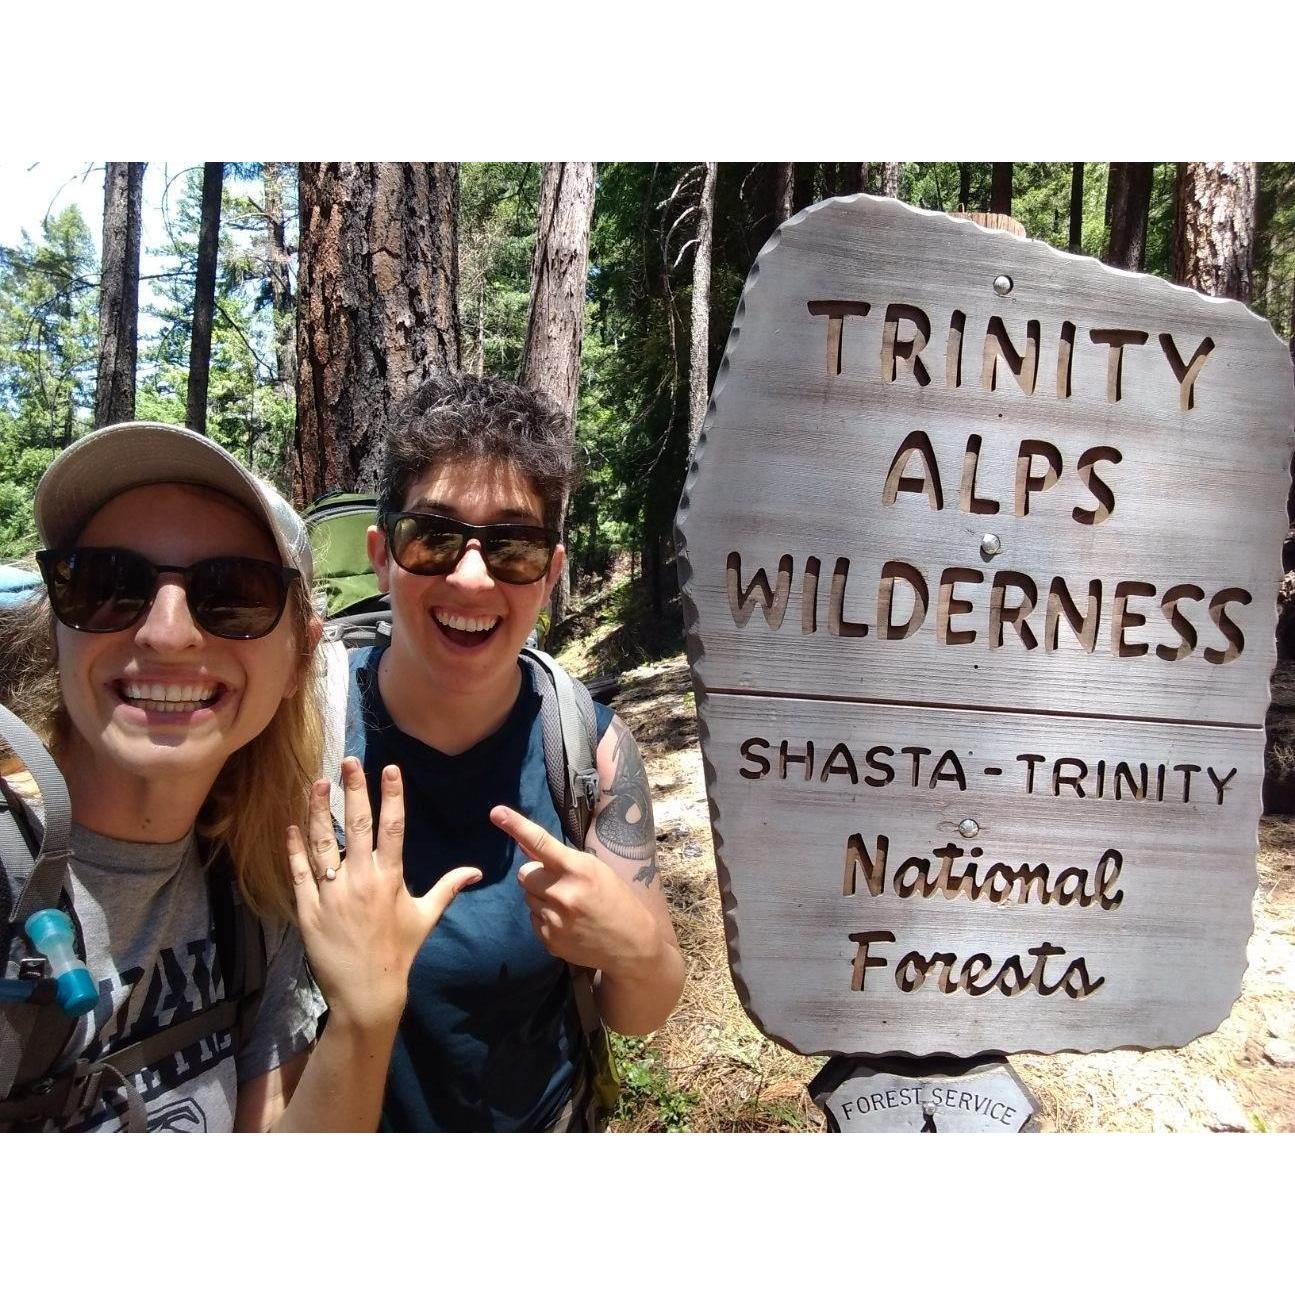 Right after Timna proposed while backpacking in the Trinity Alps.